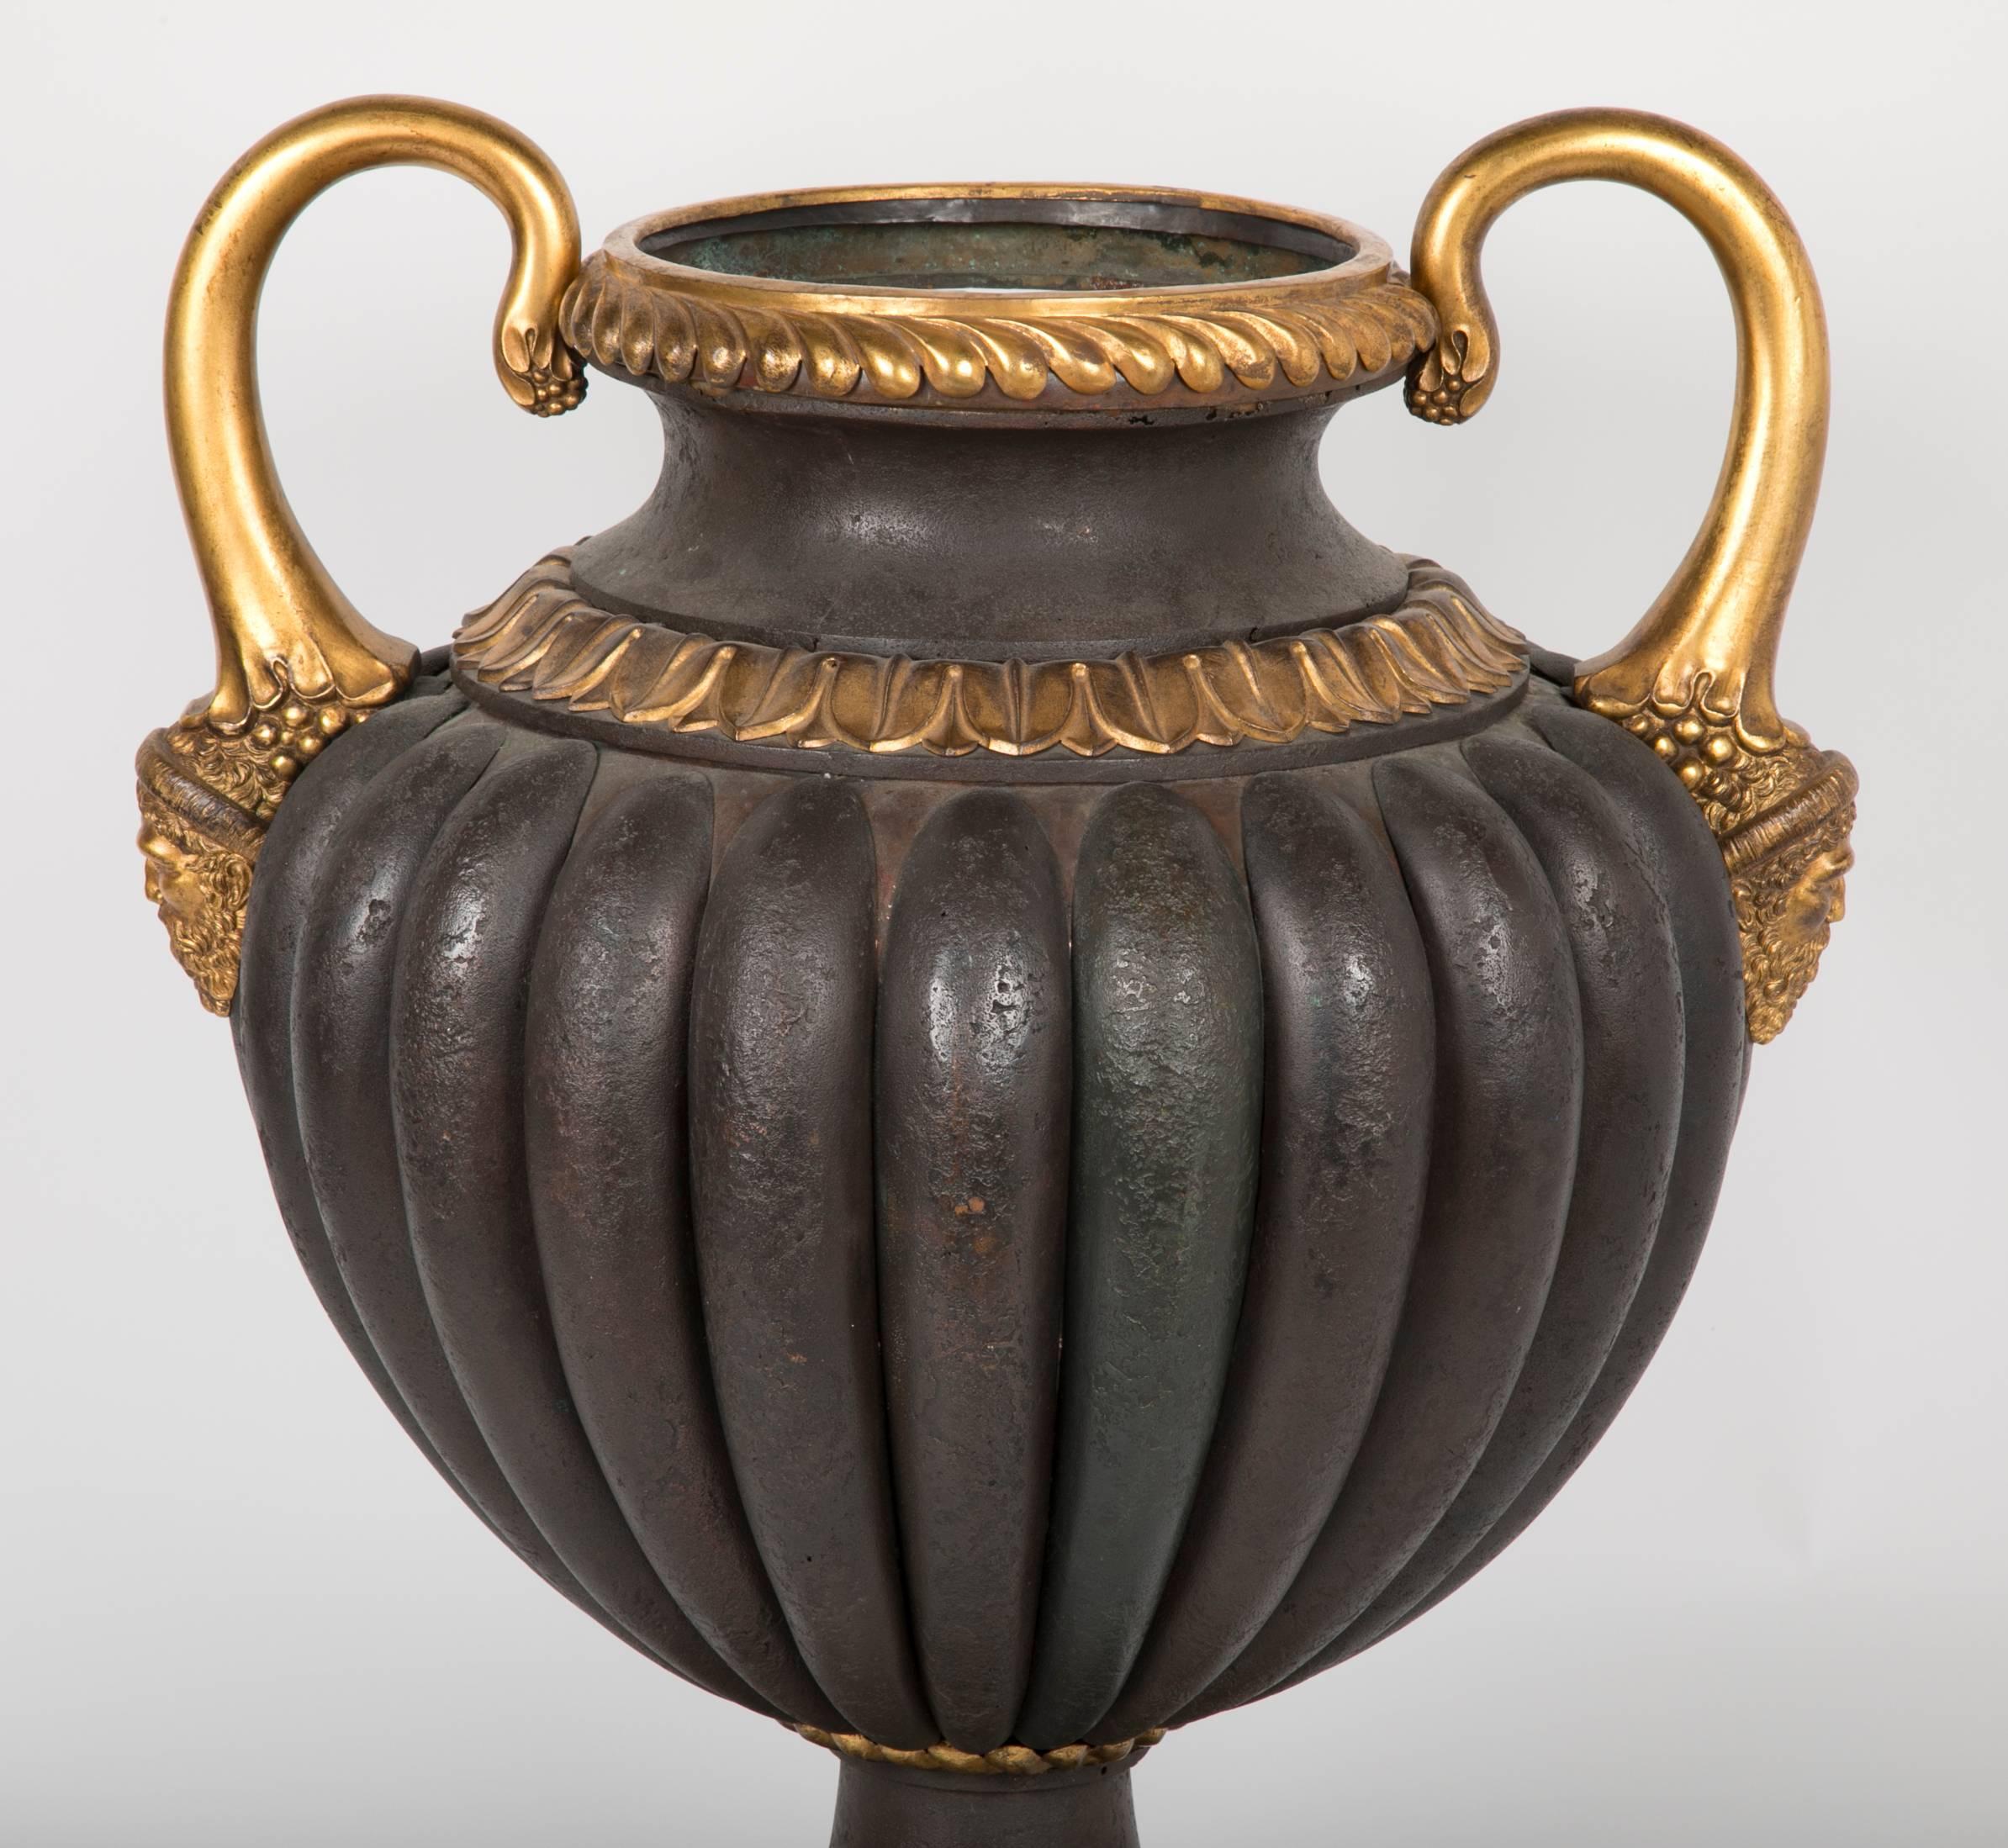 An Italian urn with gilt bronze handles have bearded men at there bases.  The urn has applied convex tole ribbing terminating at a pedestal base adorned in floral petals. 
24 ¼ in. (61.5 cm.) high; 19 in. (48 cm.) wide